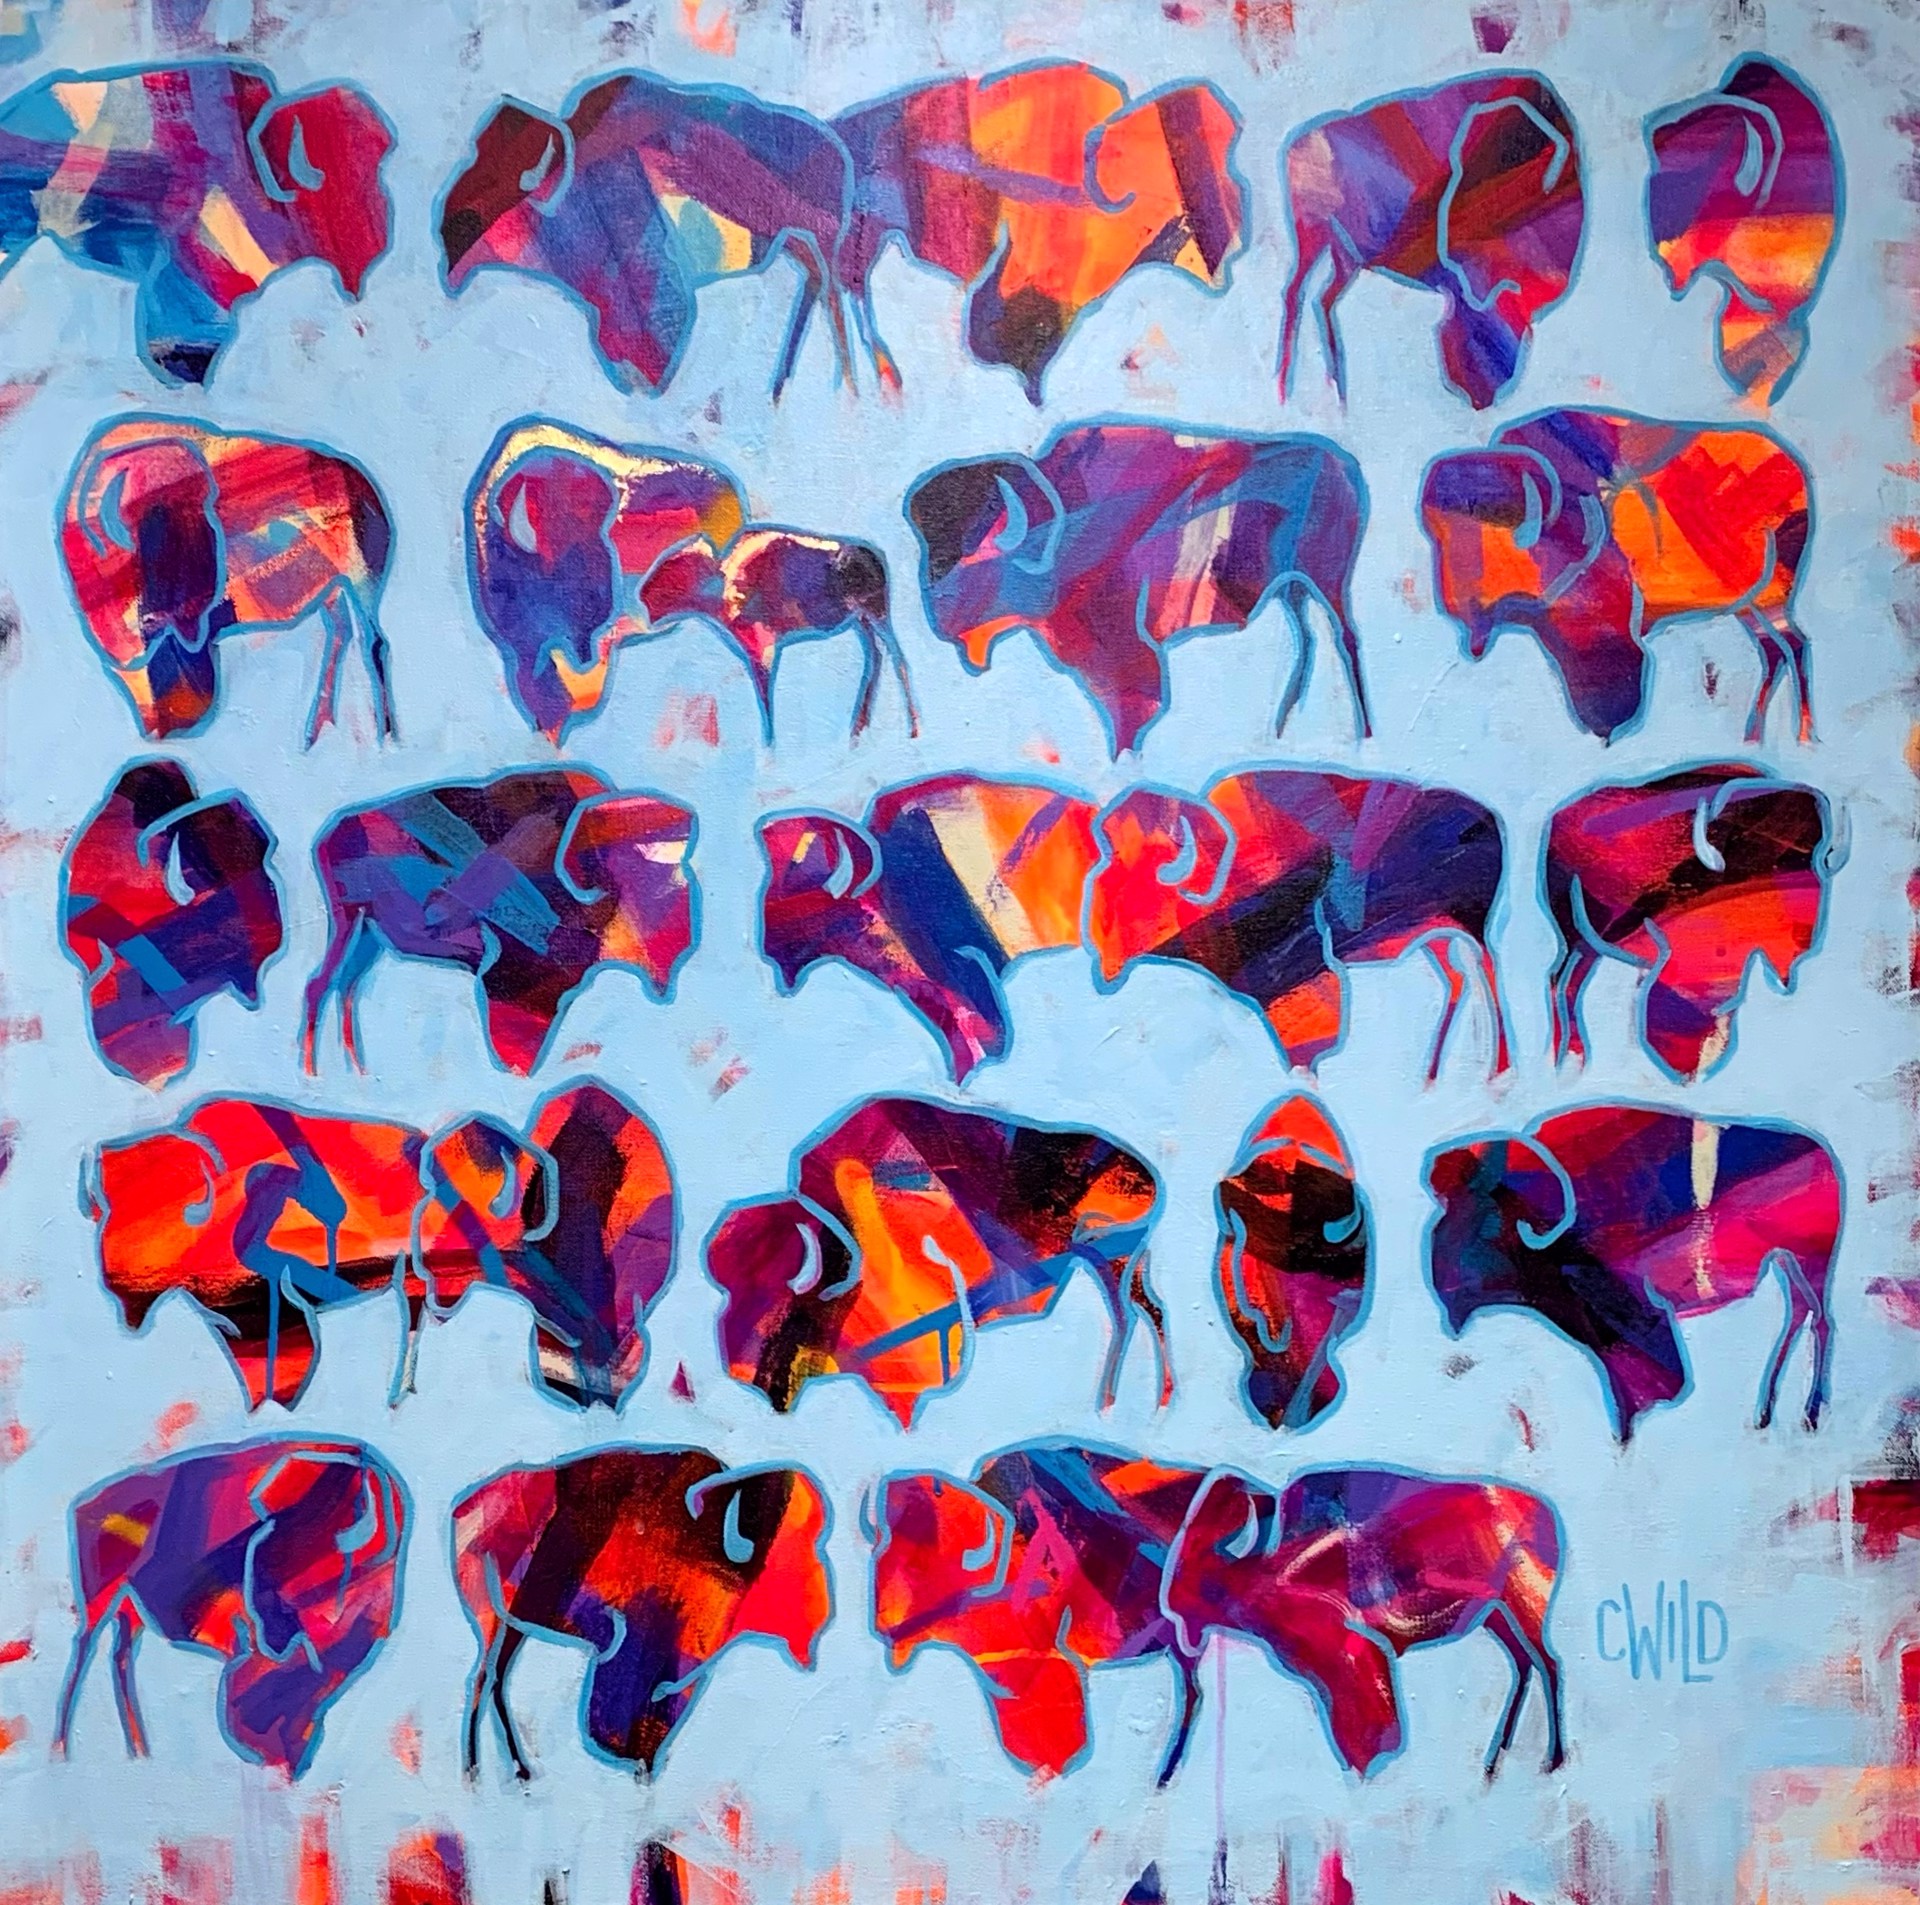 A Contemporary Abstract Of Line Drawings Of Bison With Colorful Paint Filling Them In By Carrie Wild At Gallery Wild